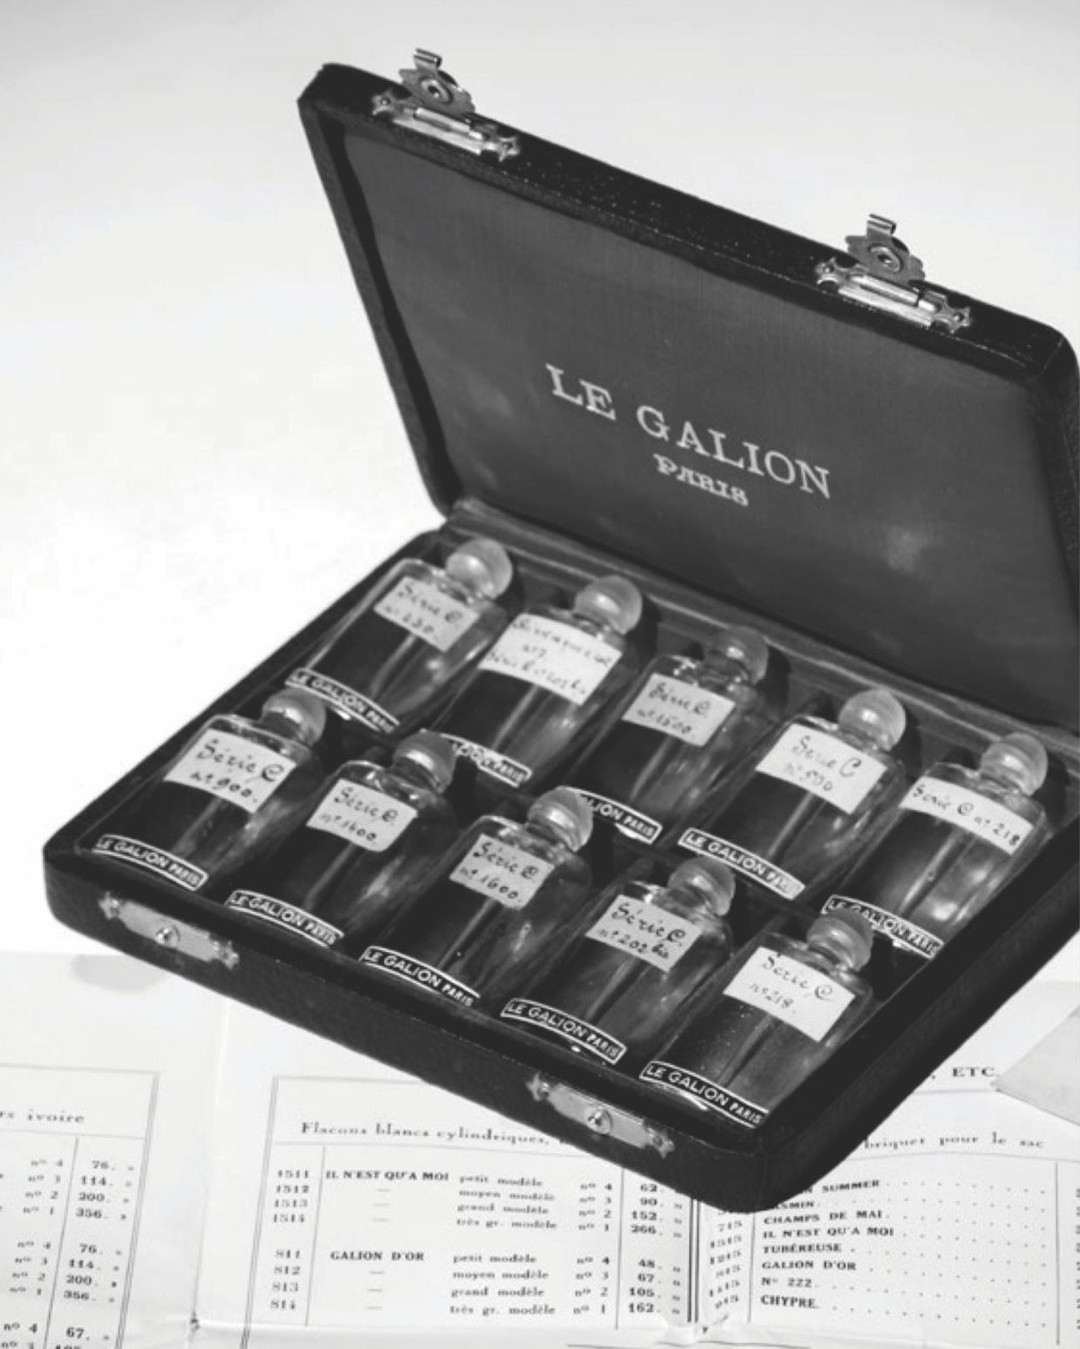 Le Galion Saga - 2014 ✍️
More than 30  years after Le Galion was sold to an american group and poorly managed, then quickly collapsed, the Perfume House is reborn from the ashes. Back are the original, exceptional, fiery and subtle fragrances - rare luxury and refined creations. 

#legalion #legalionparis #perfume #perfumelovers #fragrance #france #saga